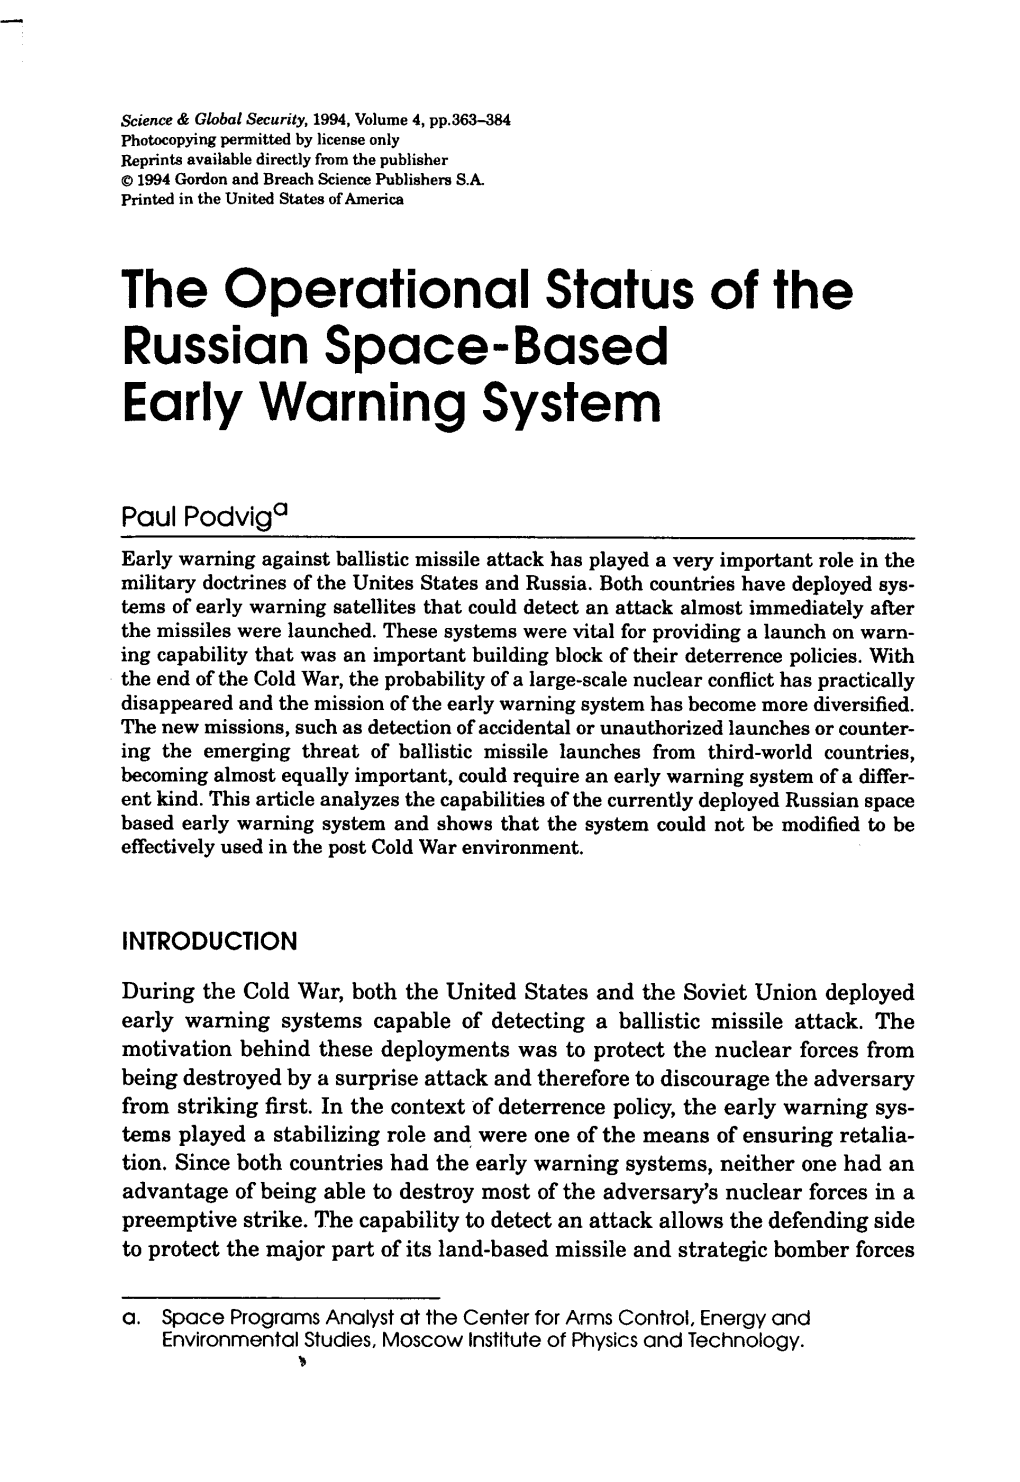 The Operational Status of the Russian Space-Based Early Warning System